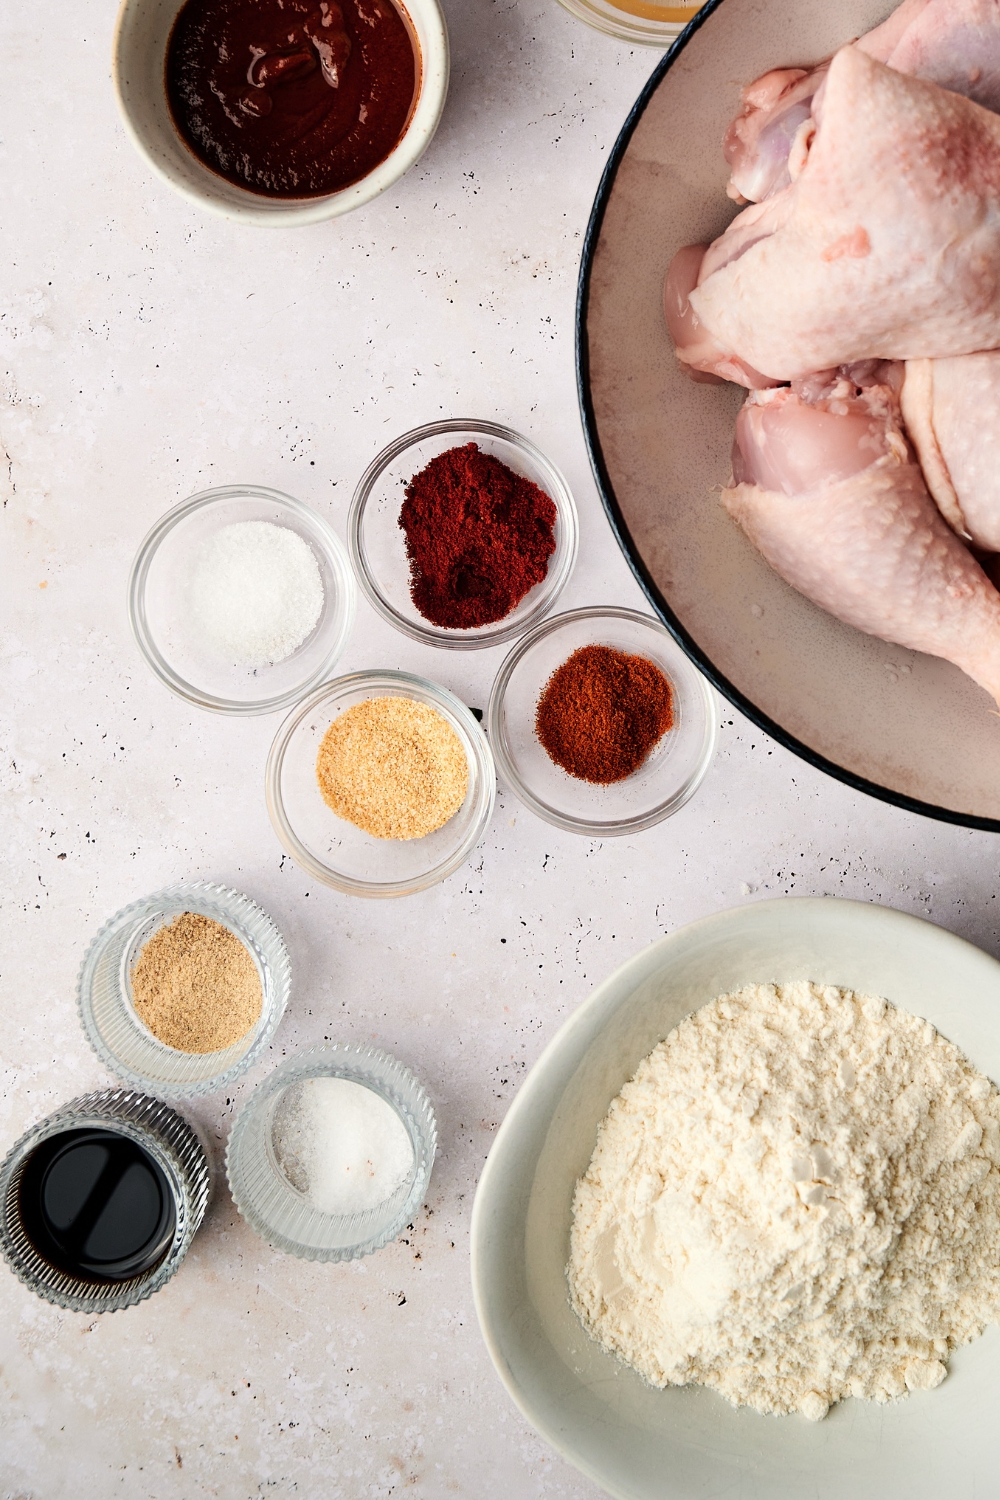 Hot sauce, raw chicken pieces, seasonings, and flour are all in separate bowls on a white counter top.